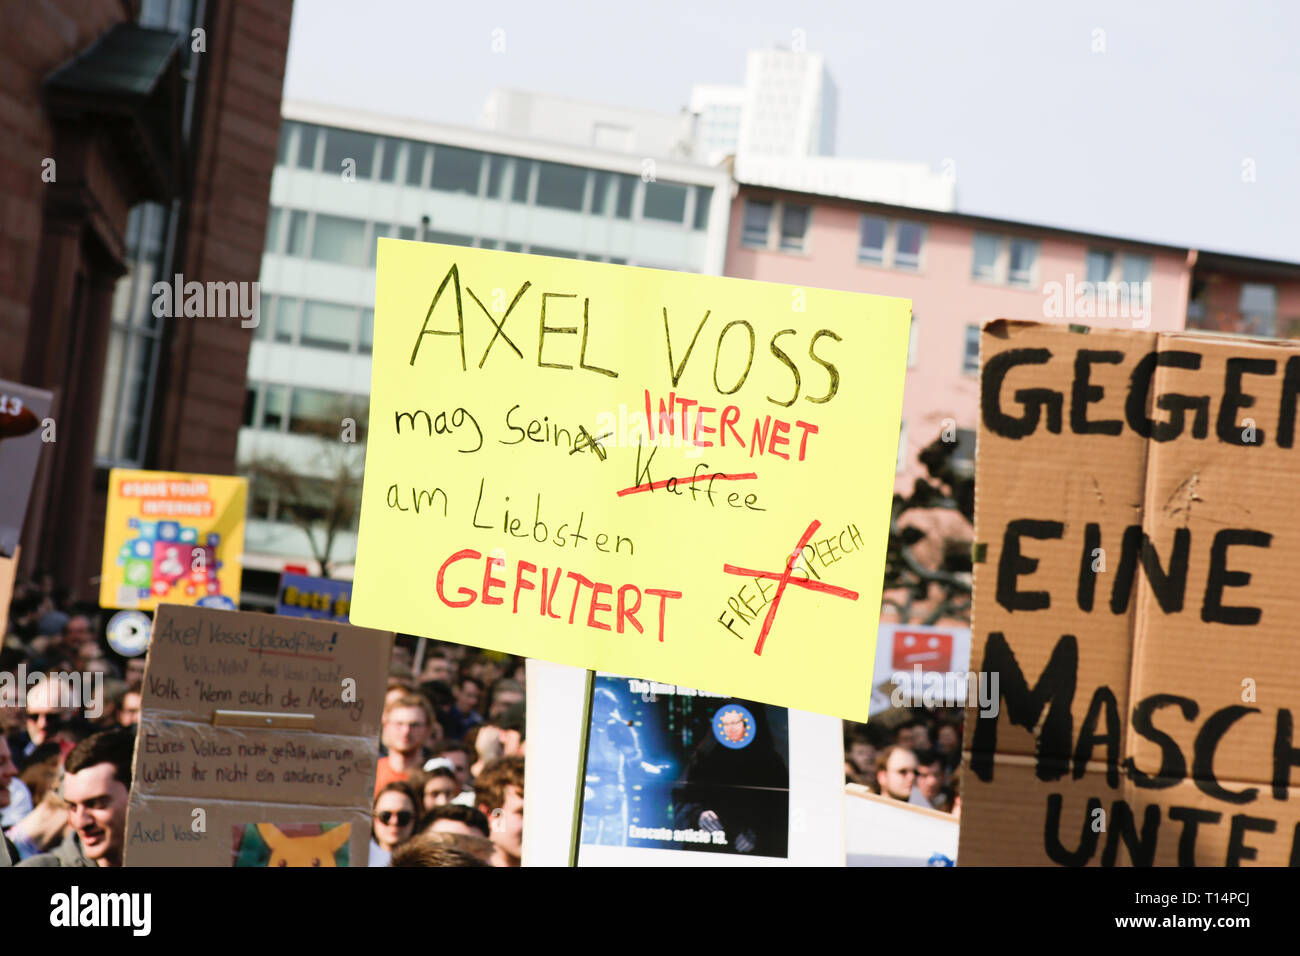 Frankfurt, Germany. 23rd Mar, 2019. A protester holds up a sign that reads 'Axel Voss likes his Internet filtered'. Axel Voss is a MEP (Member of the European Parliament) and one of the politicians who drafted the new Internet law. More than 15,000 protesters marched through Frankfurt calling for the Internet to remain free and to not to pass the new EU Copyright Directive into law. The protest was part of a Germany wide day of protest against the EU directive. Credit: Michael Debets/Pacific Press/Alamy Live News Stock Photo